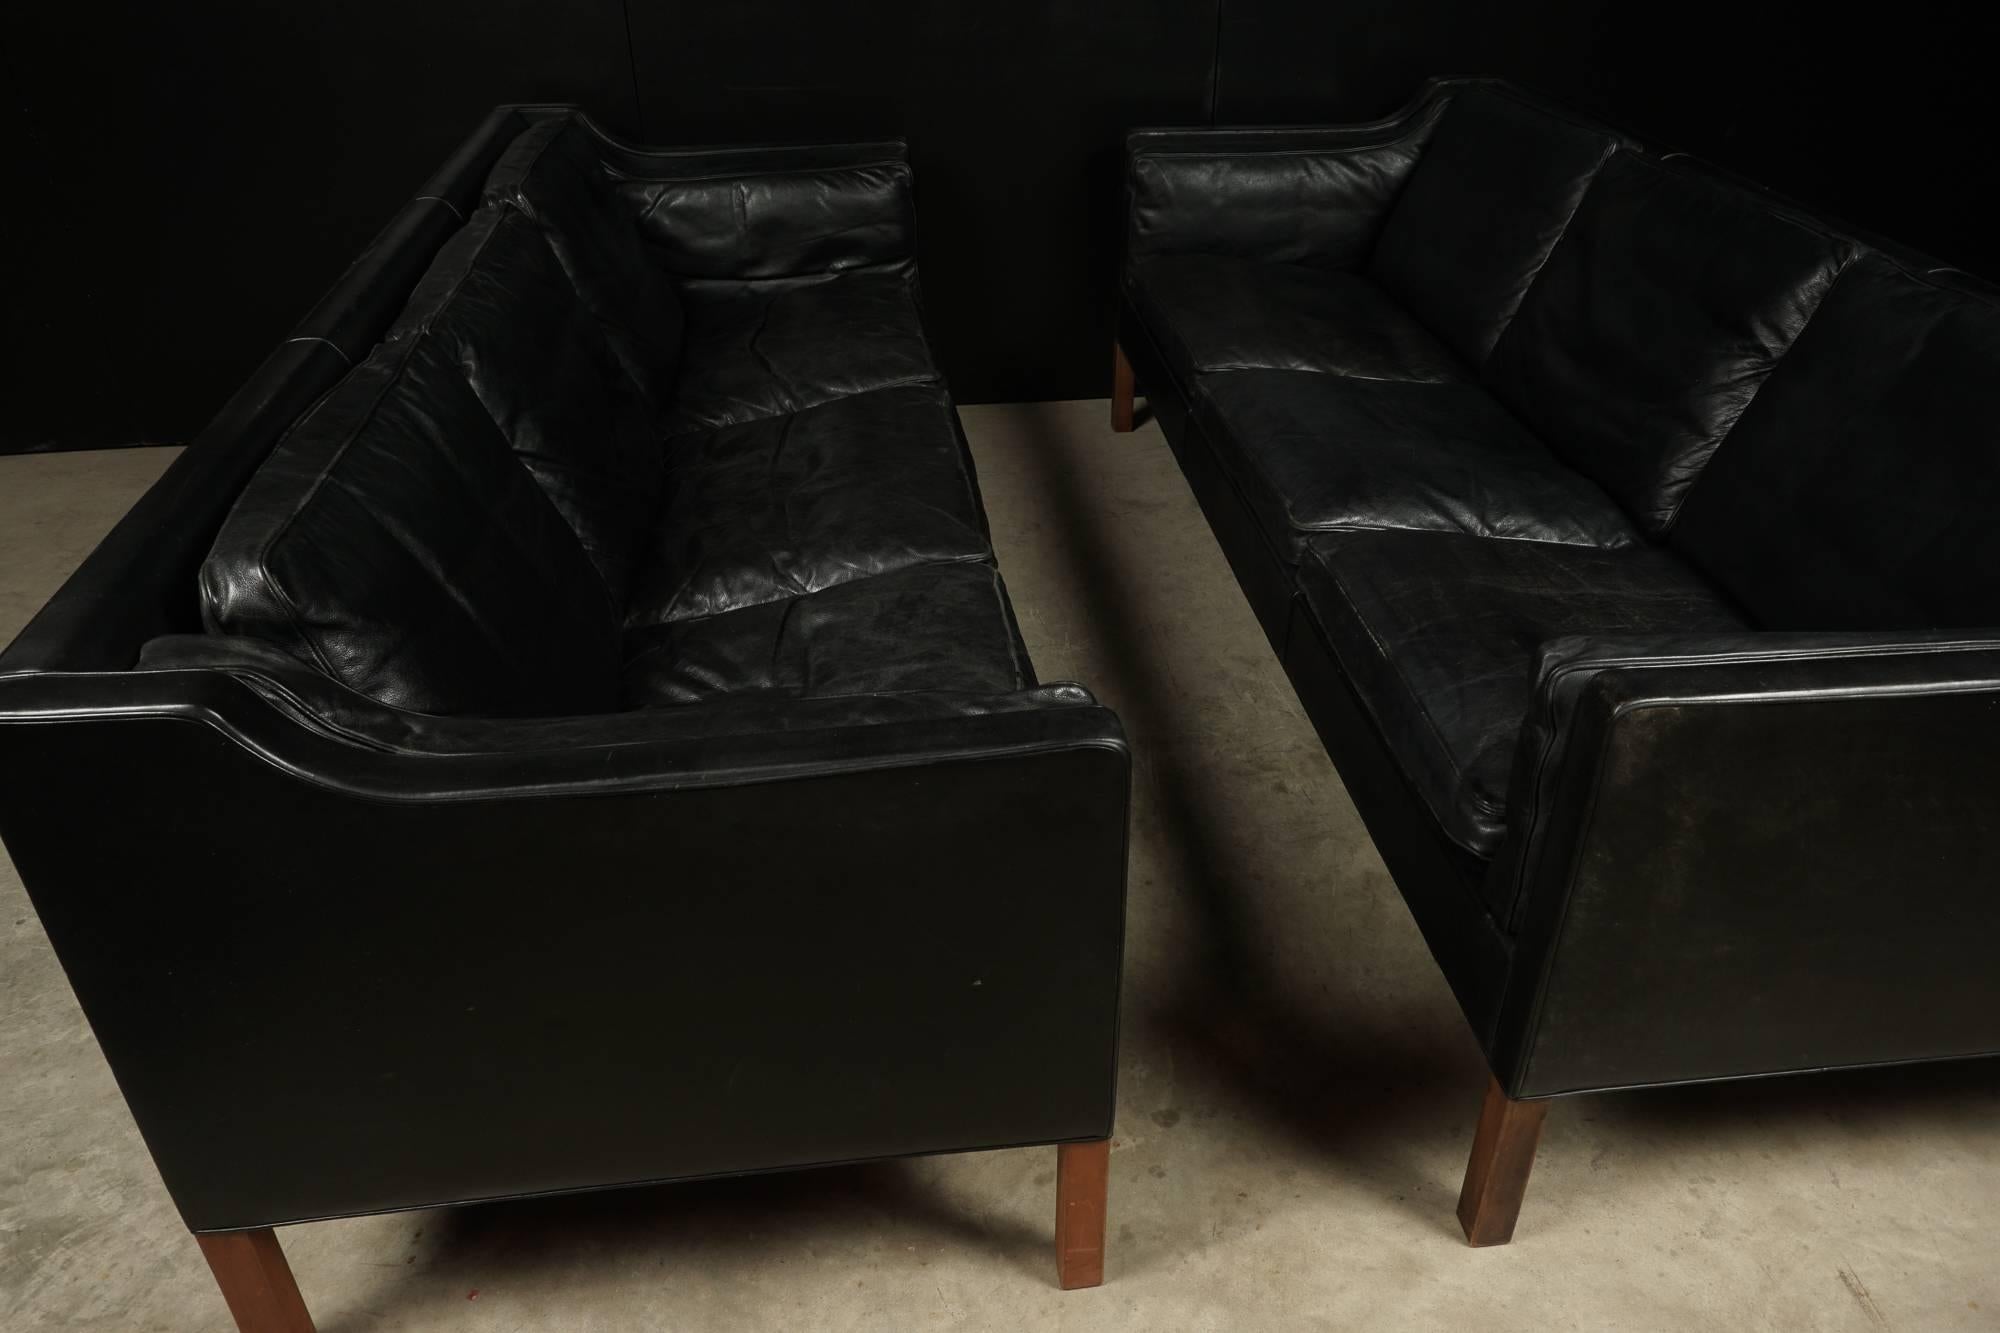 Pair of Børge Mogensen three-seat sofas, model 2213 by Fredericia Stolefabrik, Denmark. Down filled cushions covered in black leather with solid teak legs.